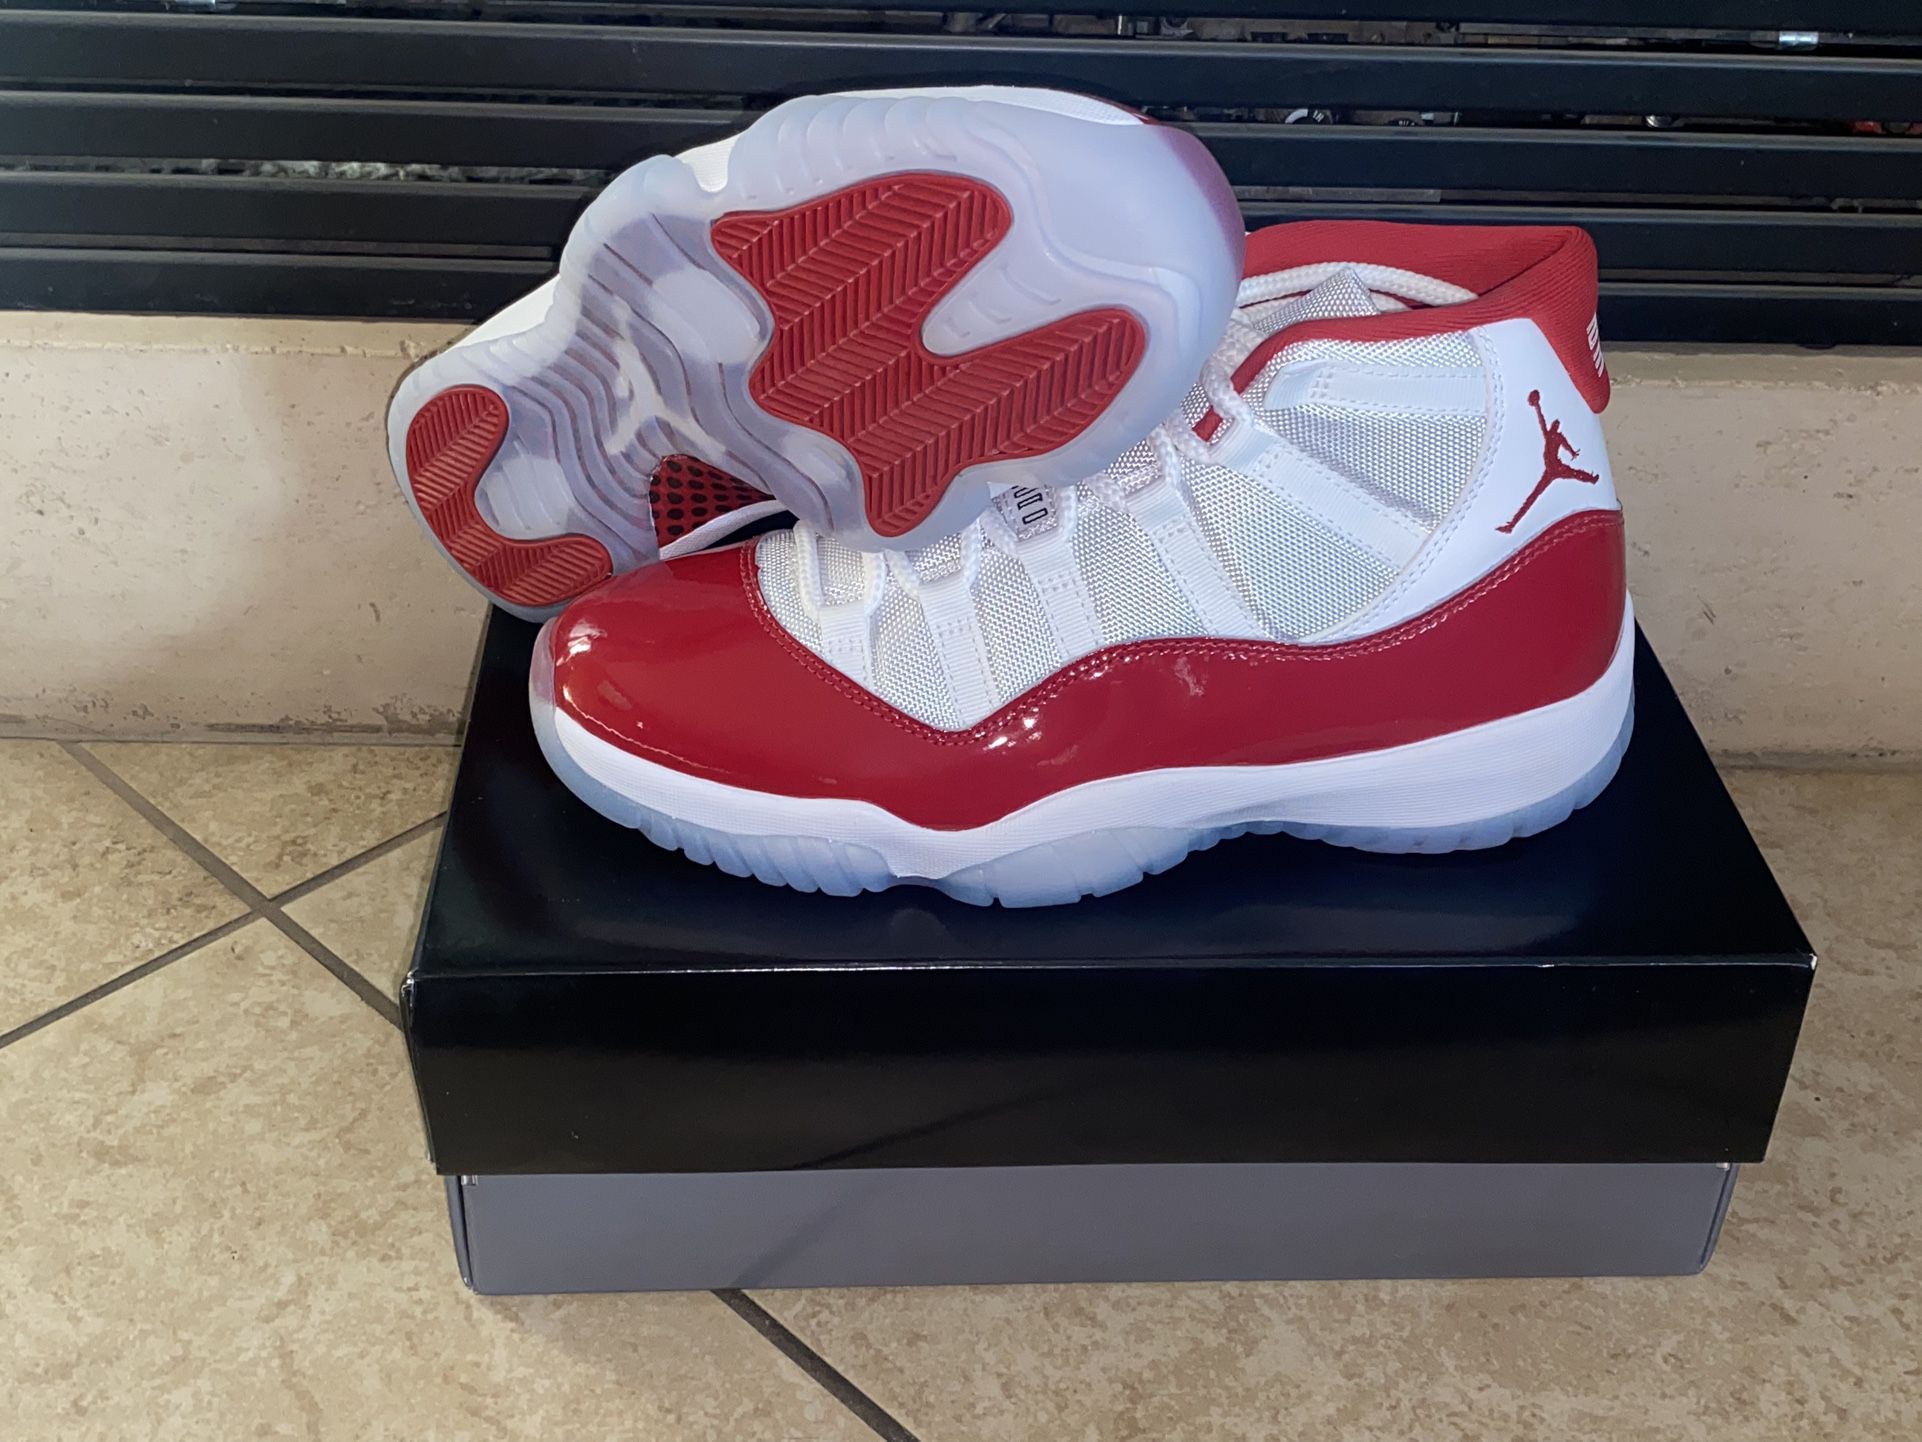 Air Jordan 11 Cherry Size 8 $270 Brand New! for Sale in Las Vegas, NV -  OfferUp